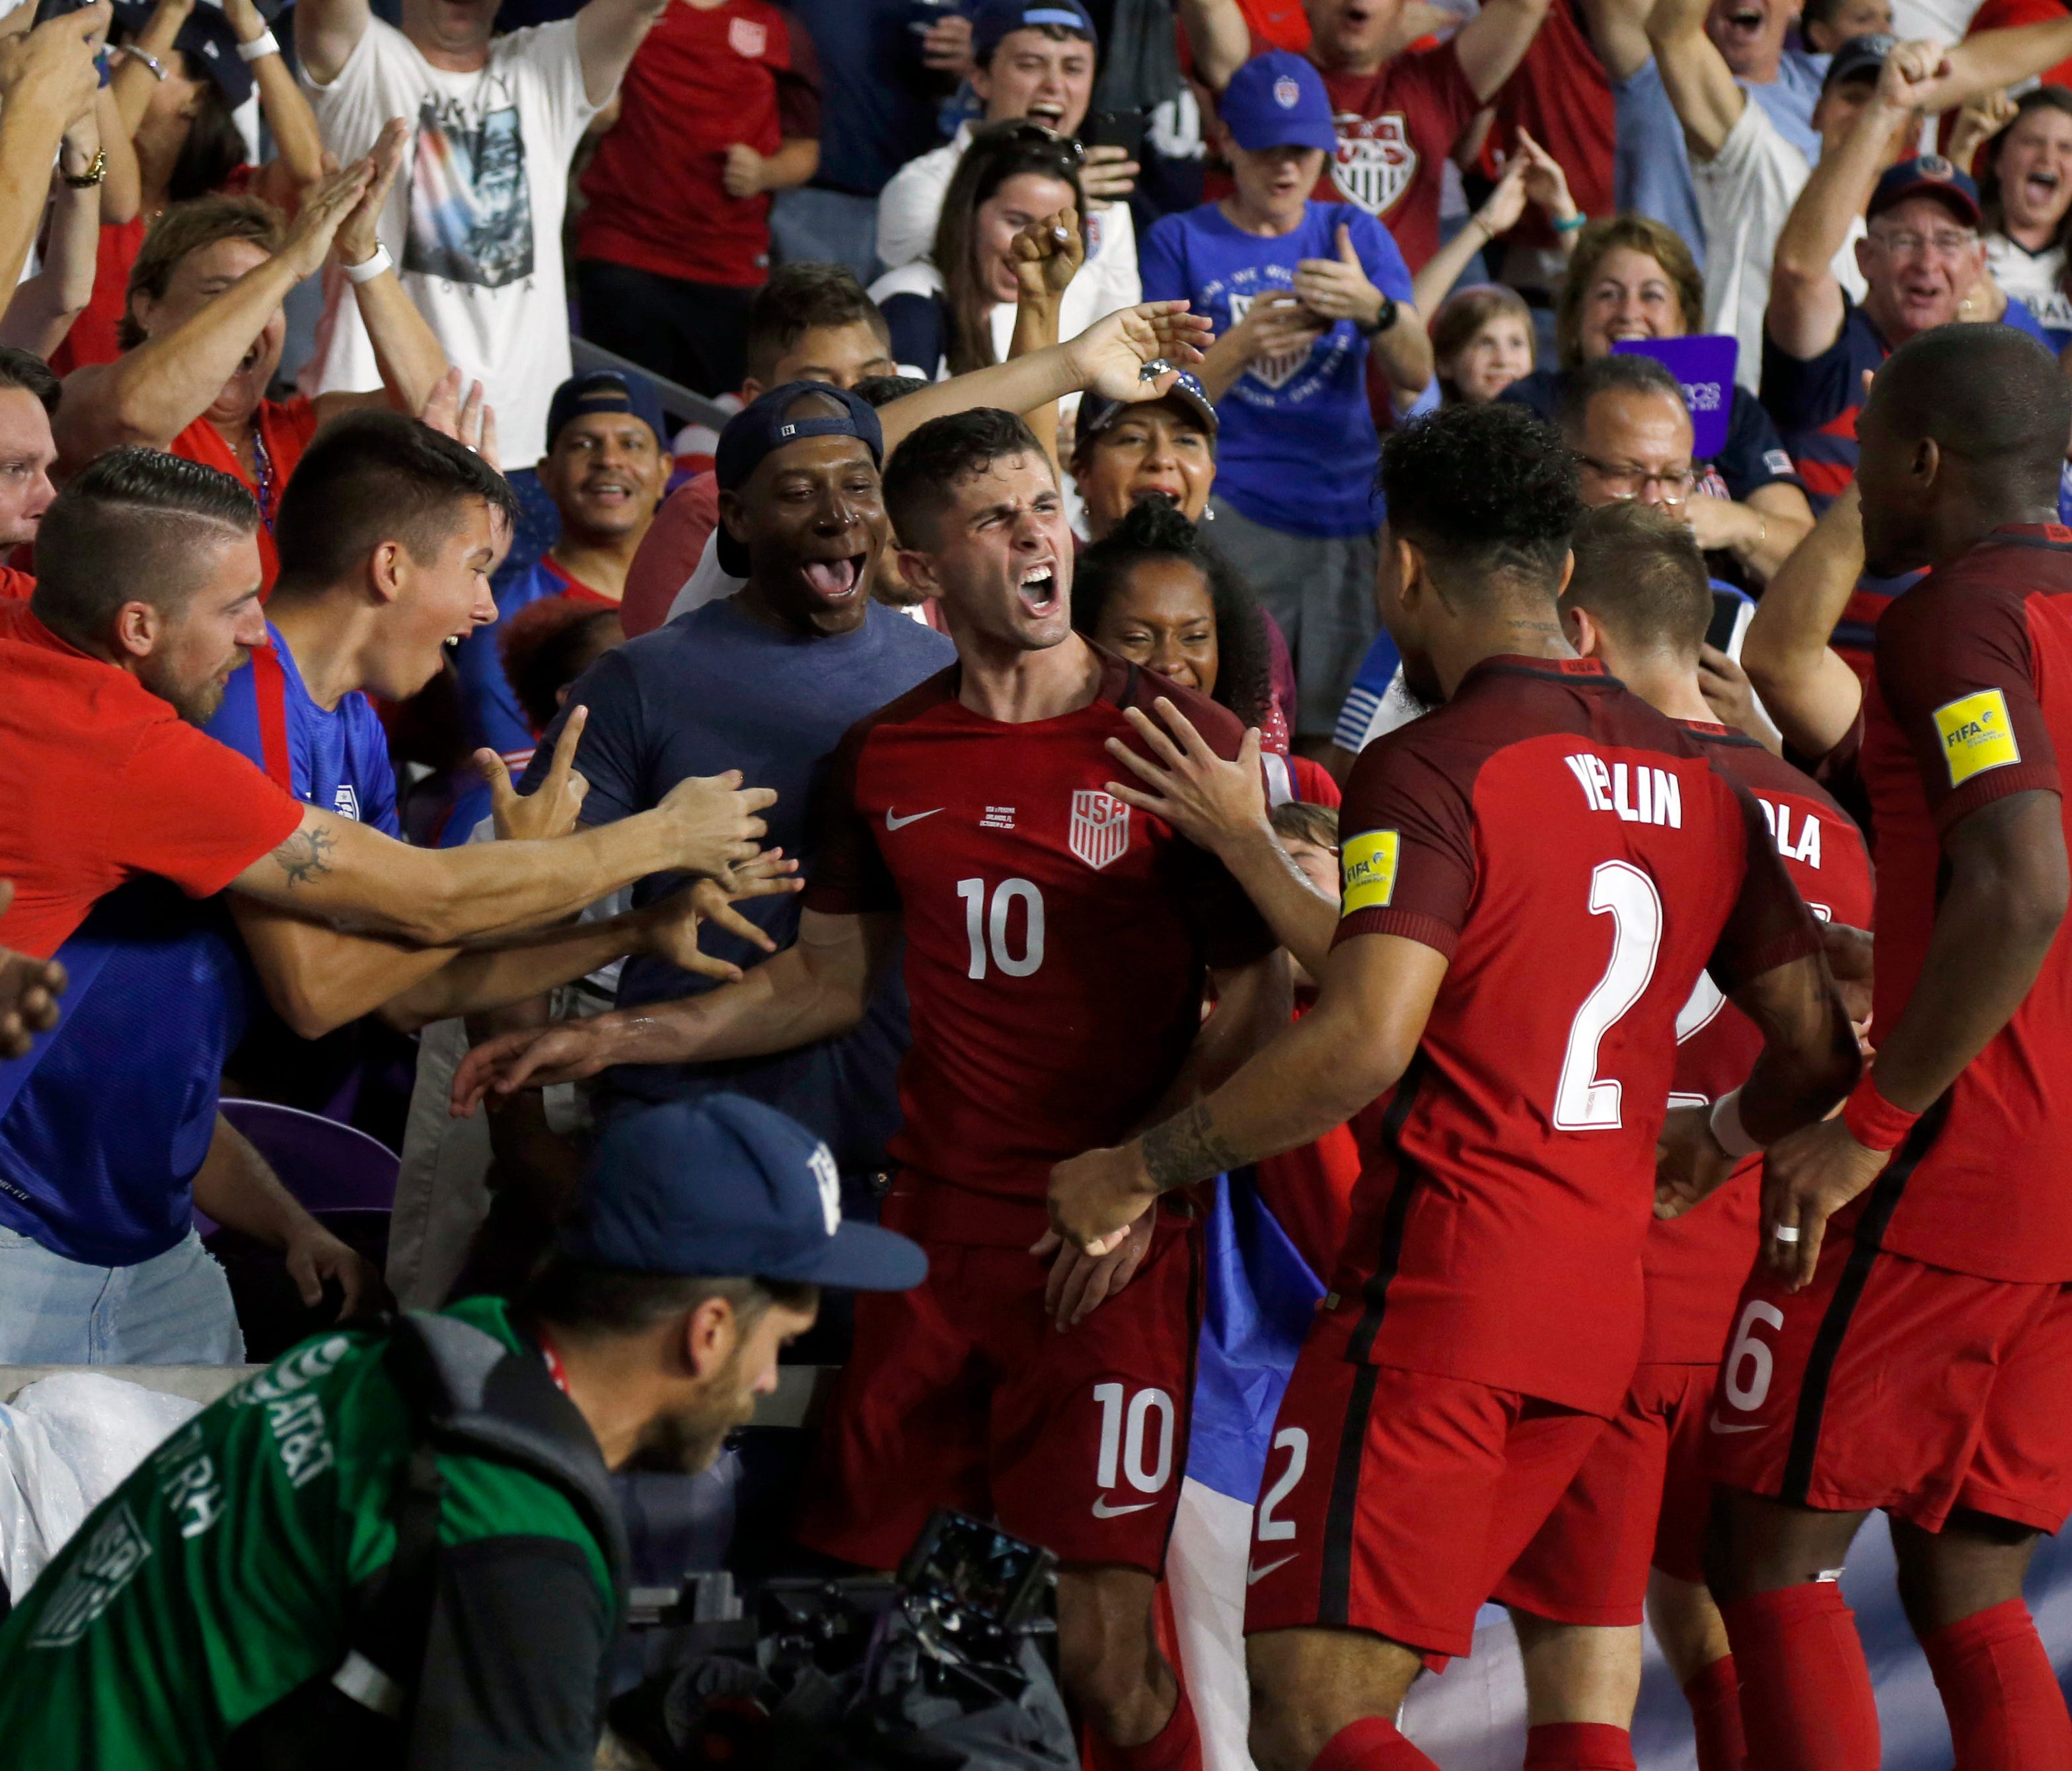 USMNT star Christian Pulisic (10) celebrates with teammates and fans after he scored a goal in a World Cup qualifying match on Friday night.